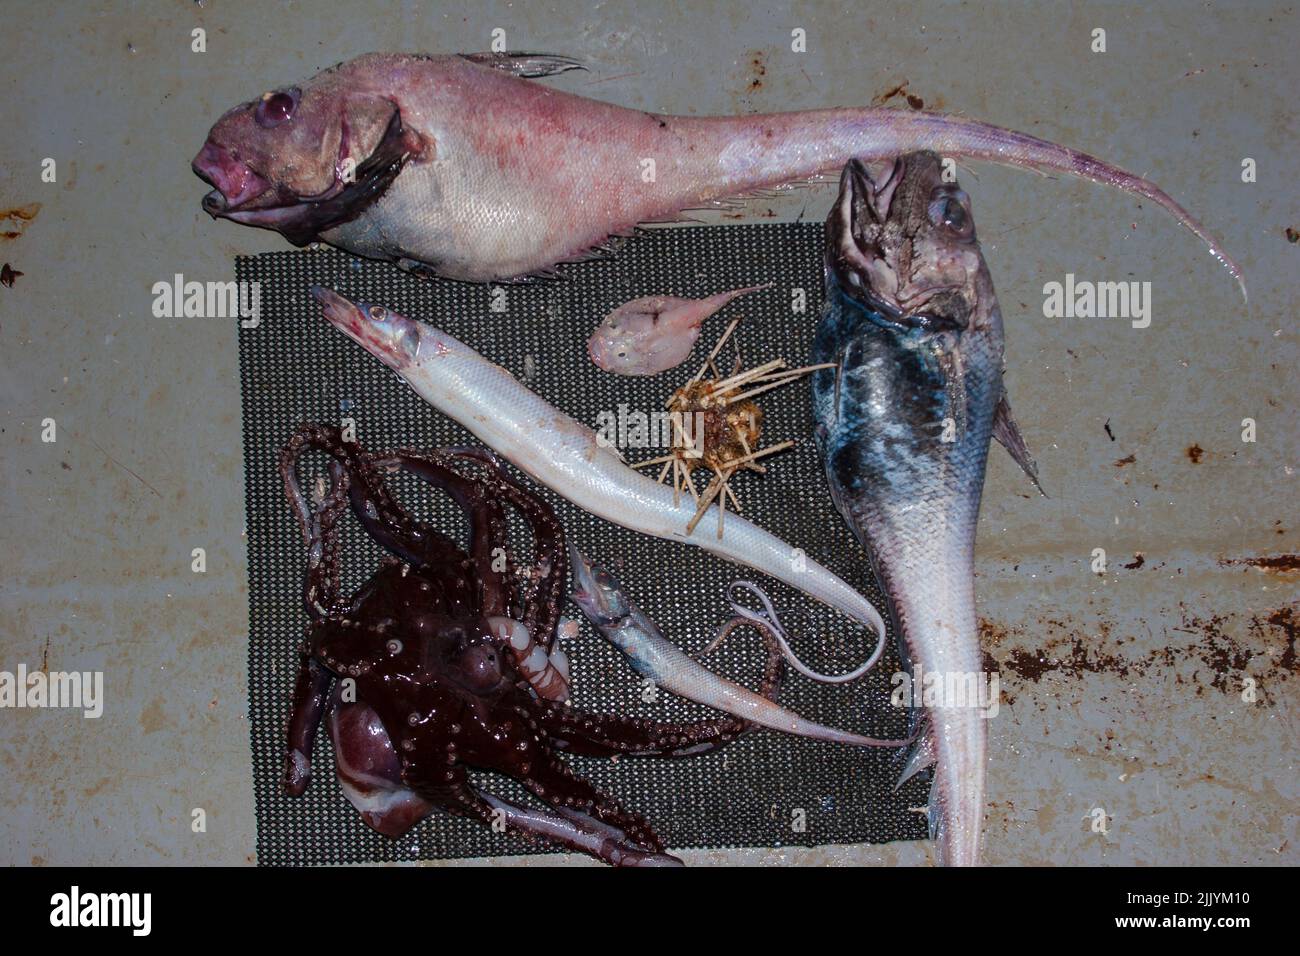 A Look at life in New Zealand: Freshly landed catch from a deep-sea trawl. Some weird and unusual species. Black Discfish; Frogmouth; eels. Stock Photo